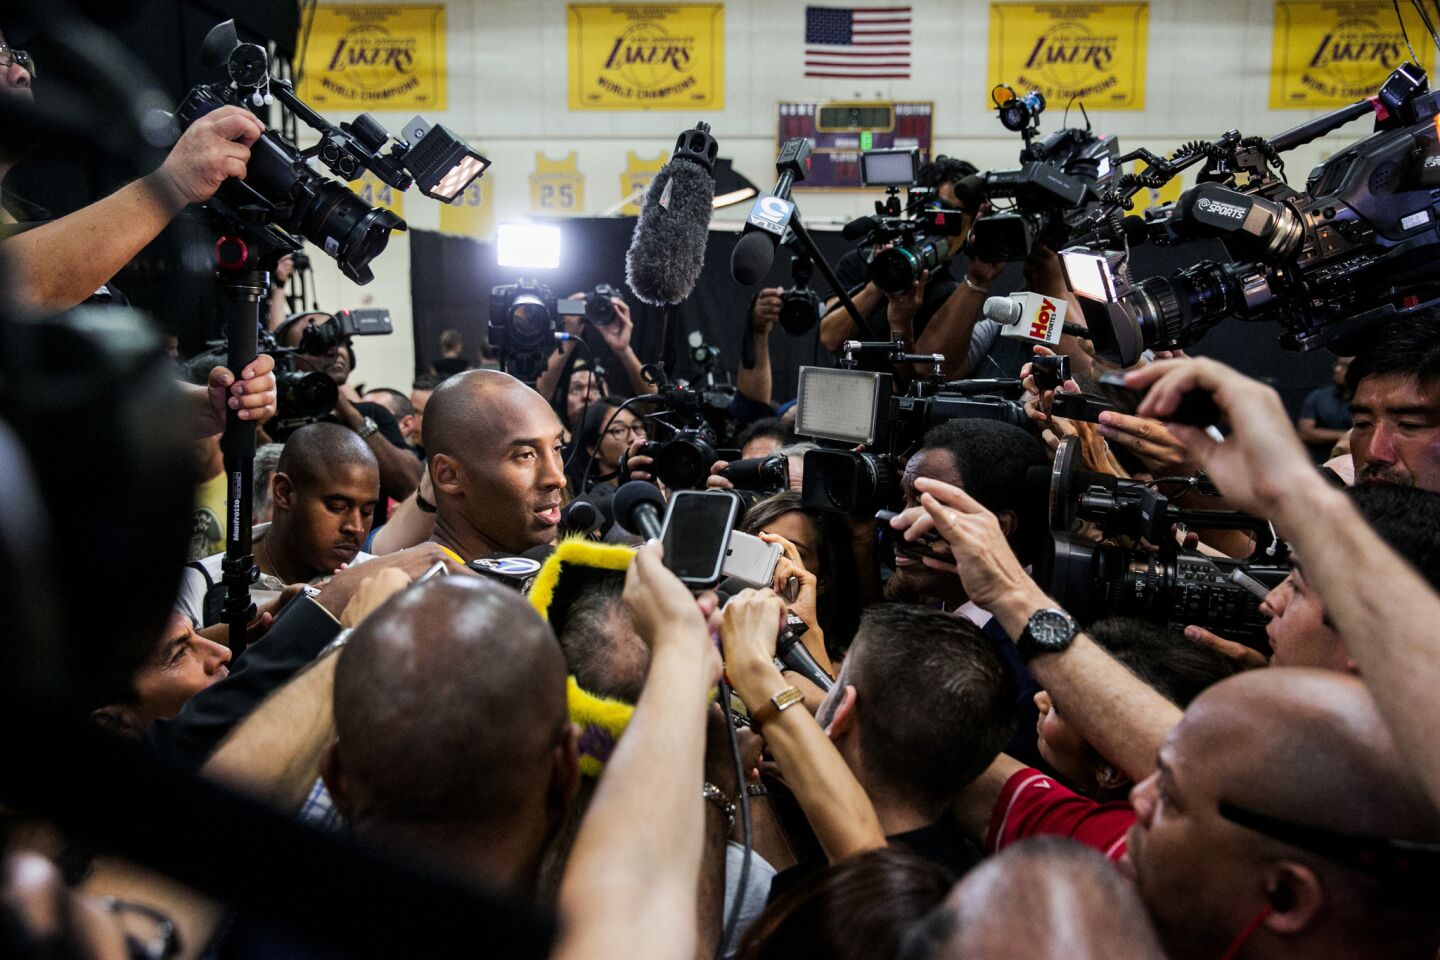 Lakers guard Kobe Bryant fields questions from reporters surrounding him during the Lakers' media day in El Segundo.